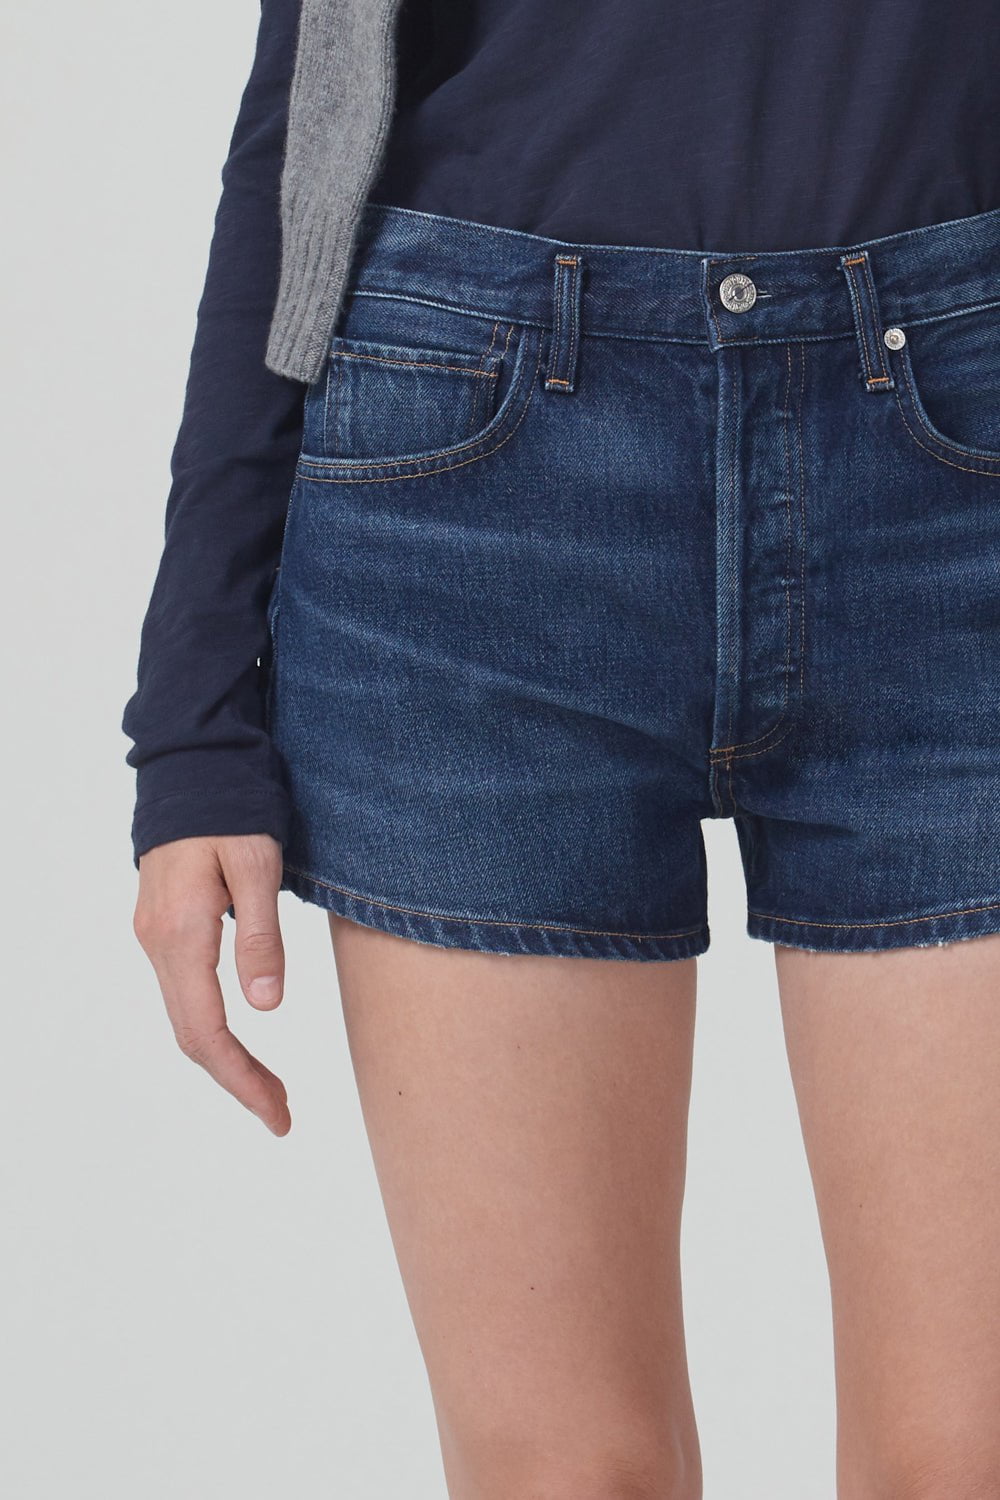 CITIZENS of HUMANITY-Marlow Vintage Shorts - Schnaps-